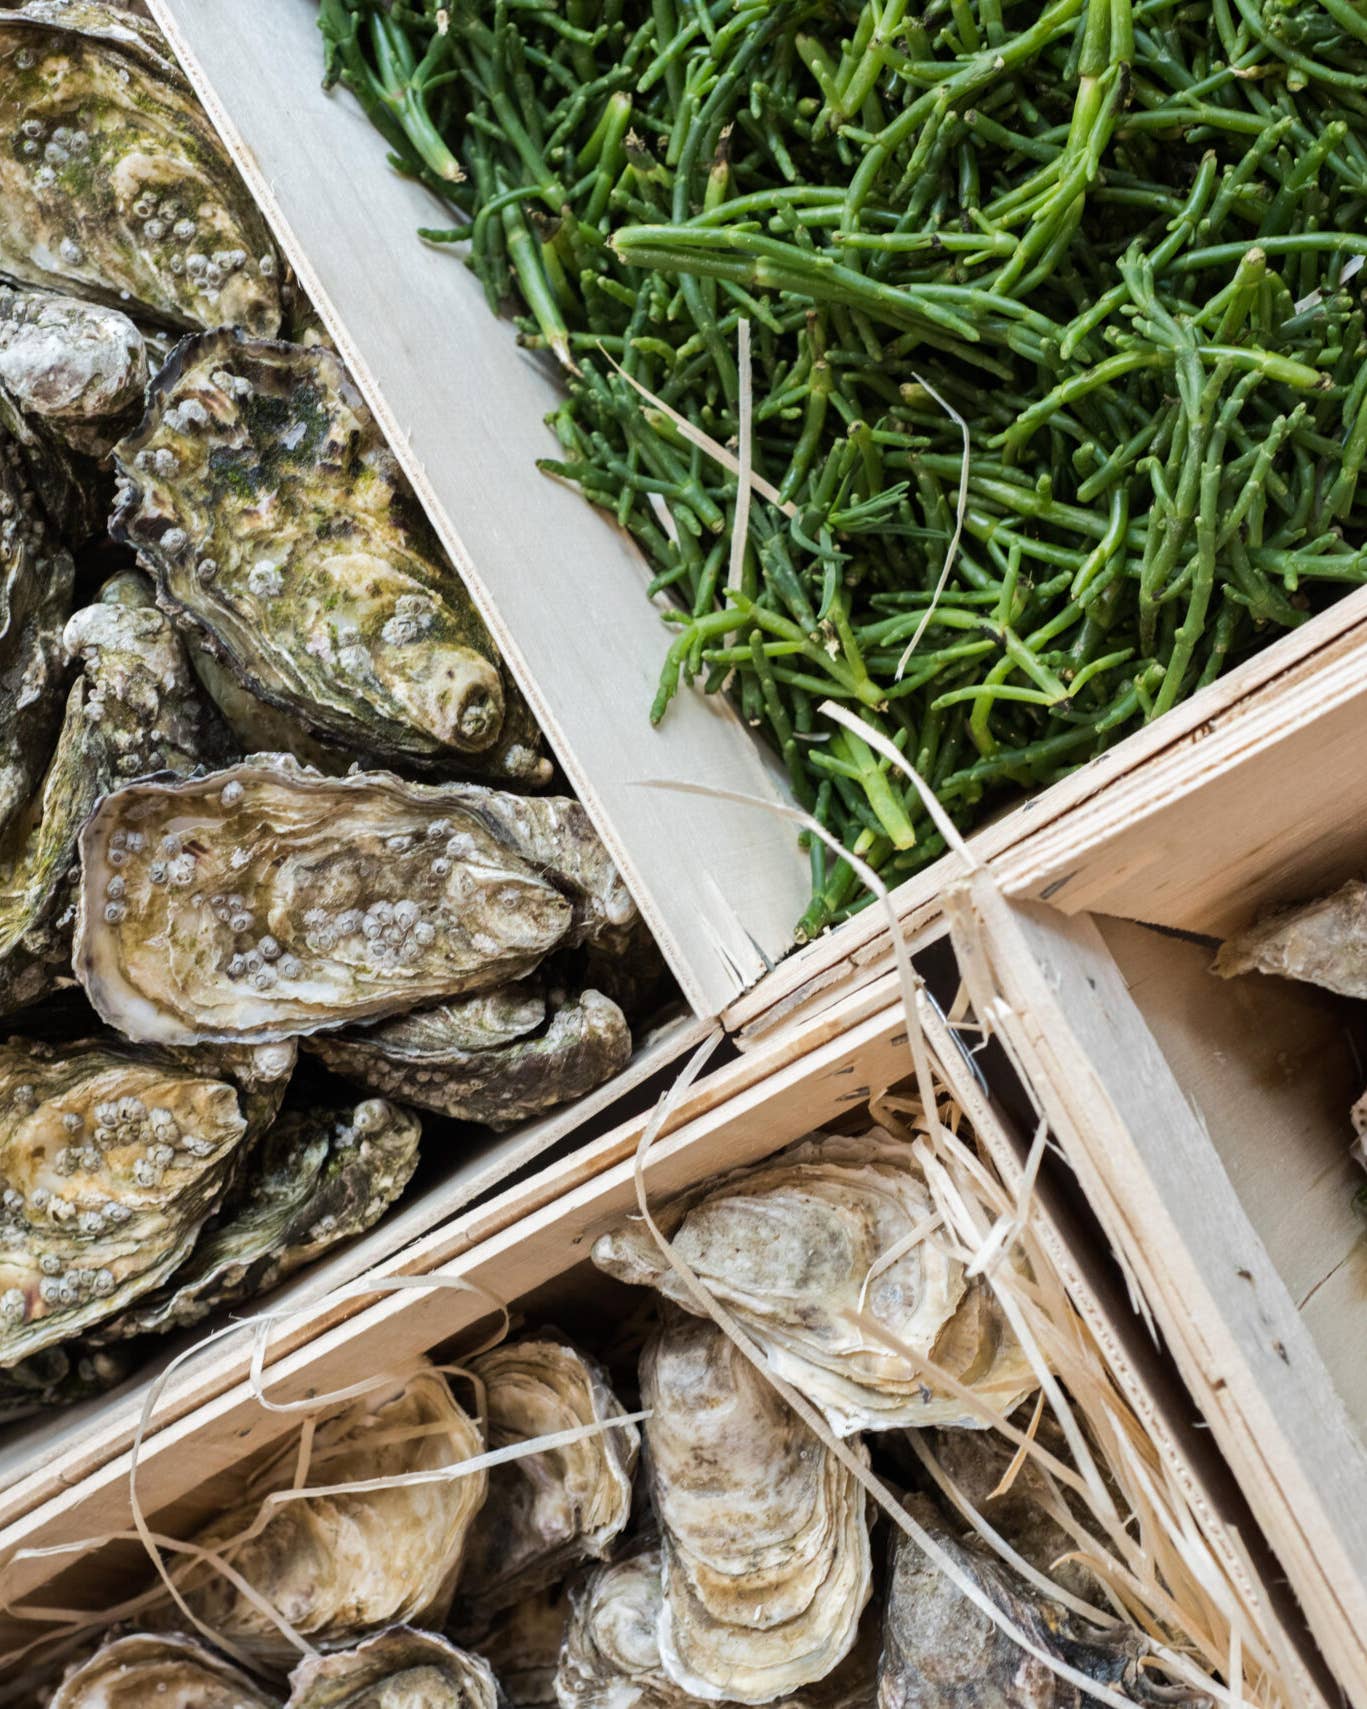 Raw Bar Season is Upon Us—Here’s What 3 French Wine Pros Pair With Their Oysters